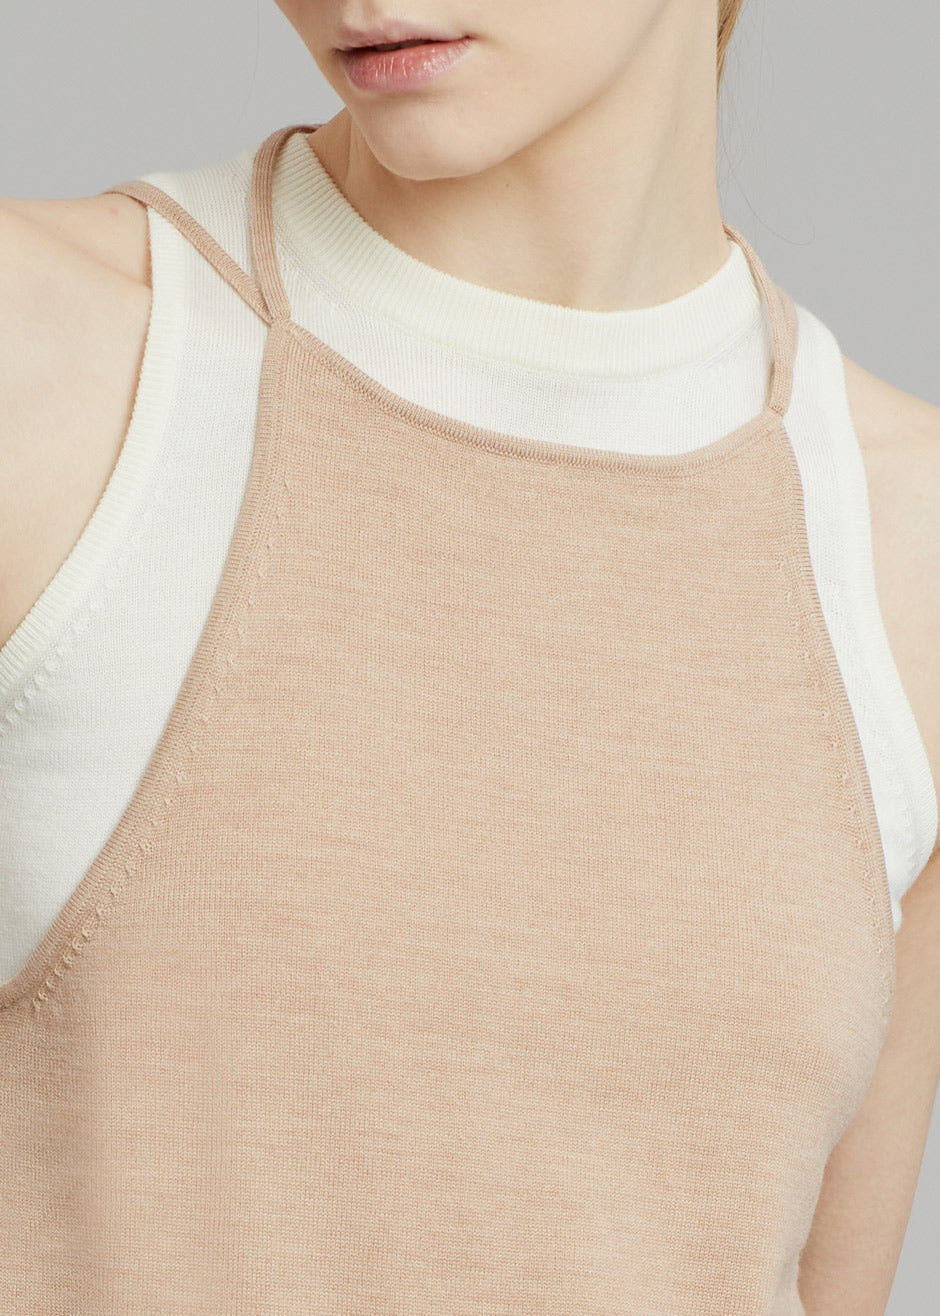 JW Anderson Layered Tank Top - White/Beige - 2